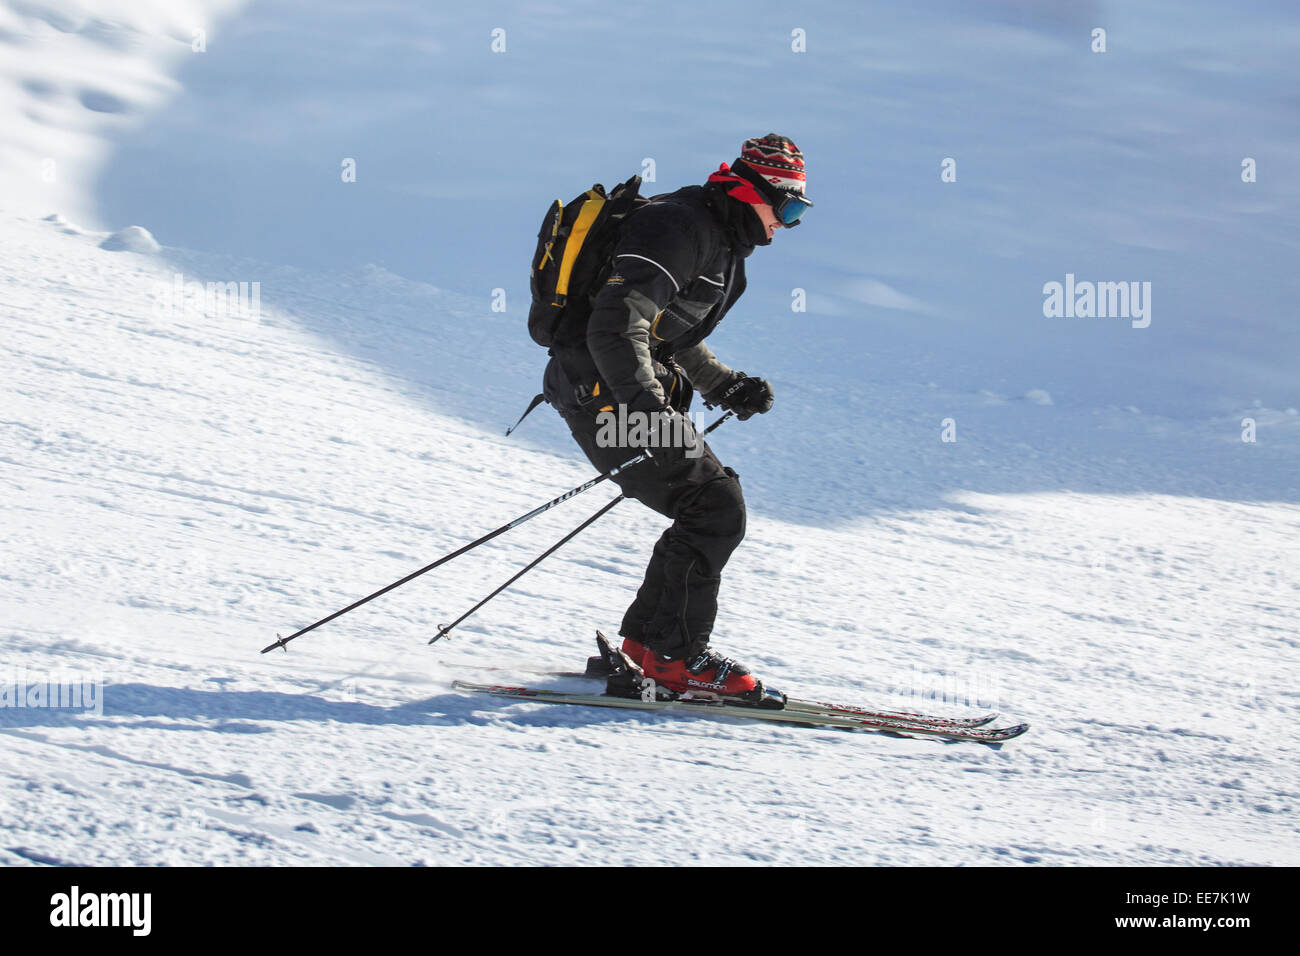 Skier with backpack skiing down ski slope in winter sports resort in the Alps Stock Photo